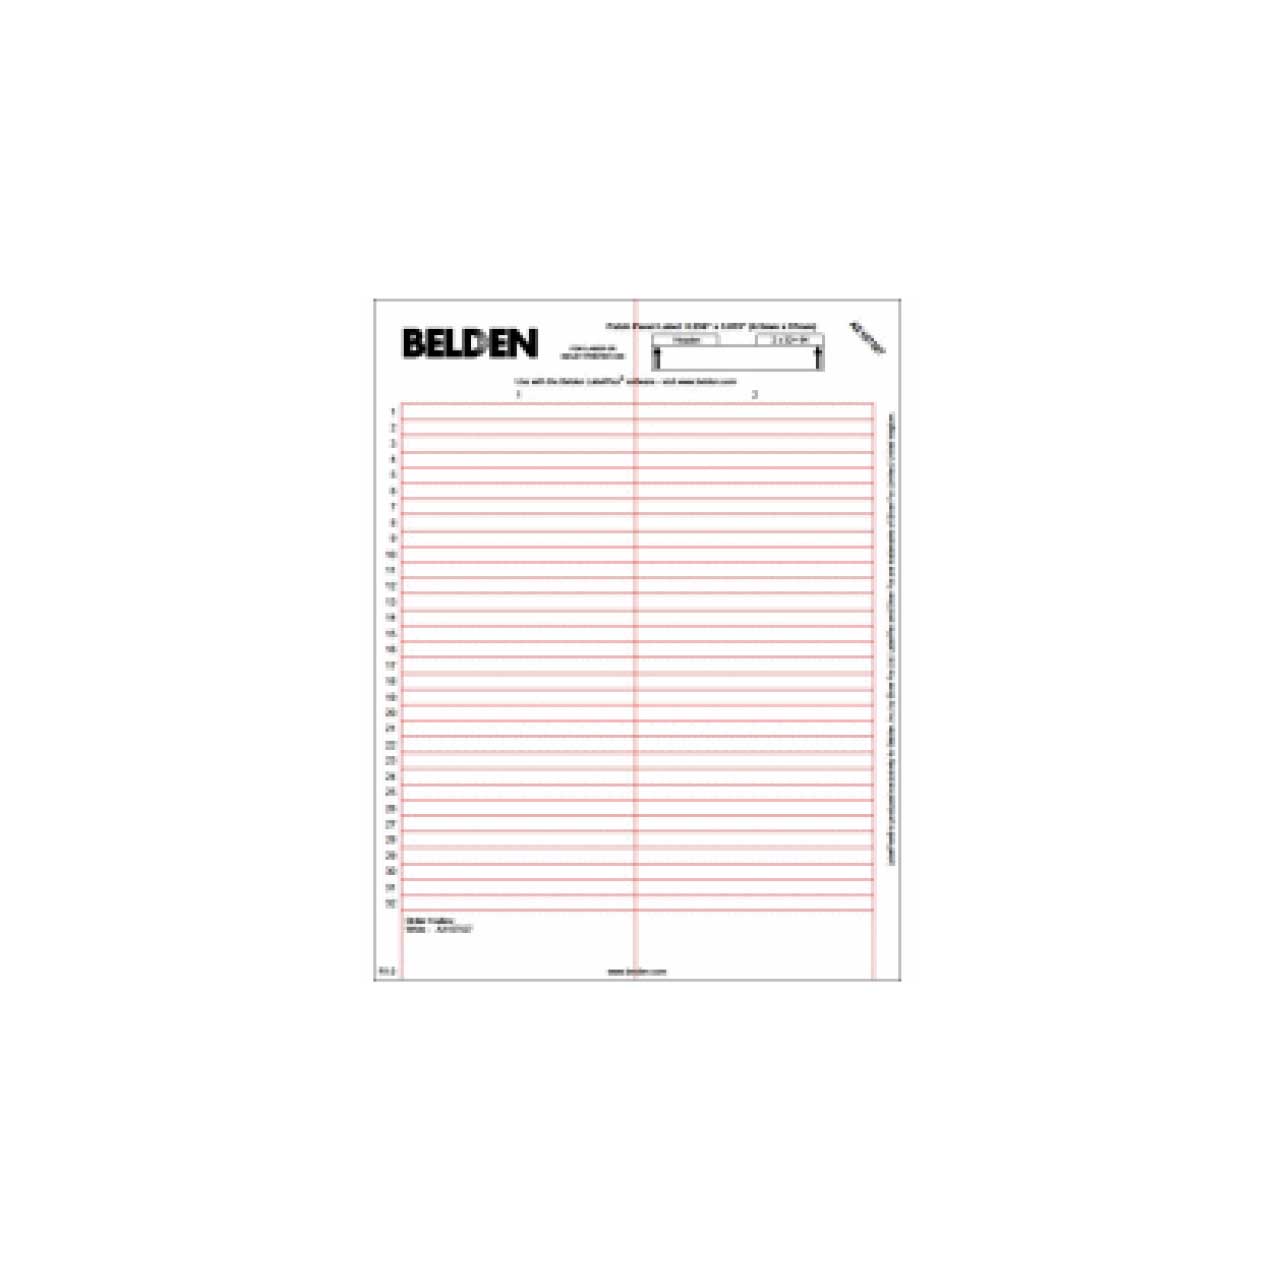 Belden AX107527 LabelFlex for REVConnect Patch Panels - White - 64 Labels / Sheet & 10 Sheets / Pack BL-AX107527